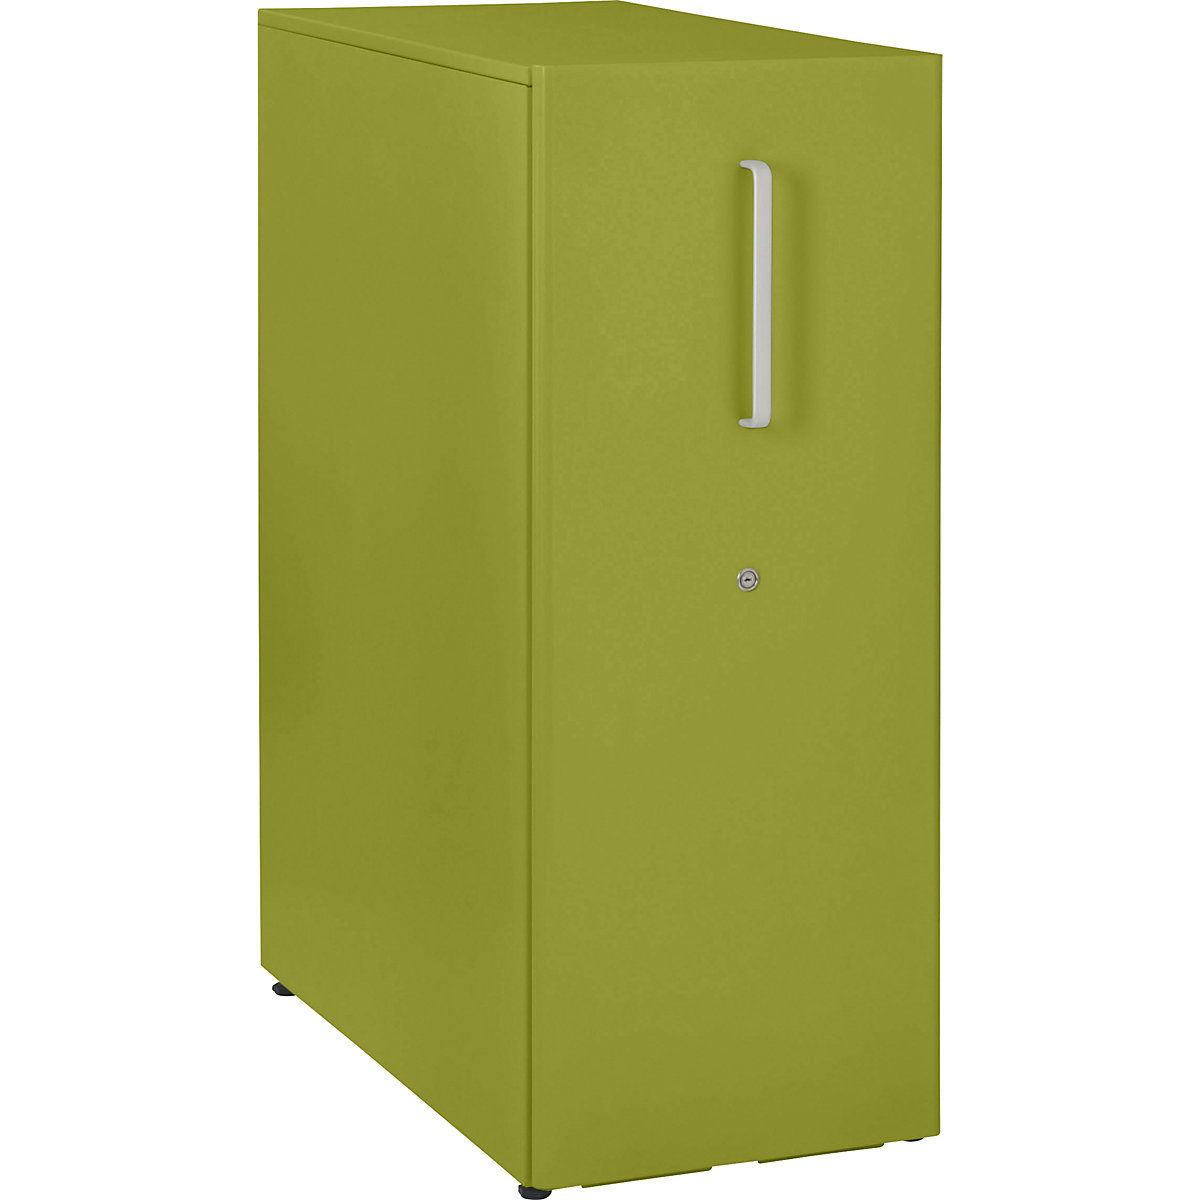 Tower™ 3 add-on furniture, with worktop, 1 pin board – BISLEY, for the left side, 1 shelf, green-12